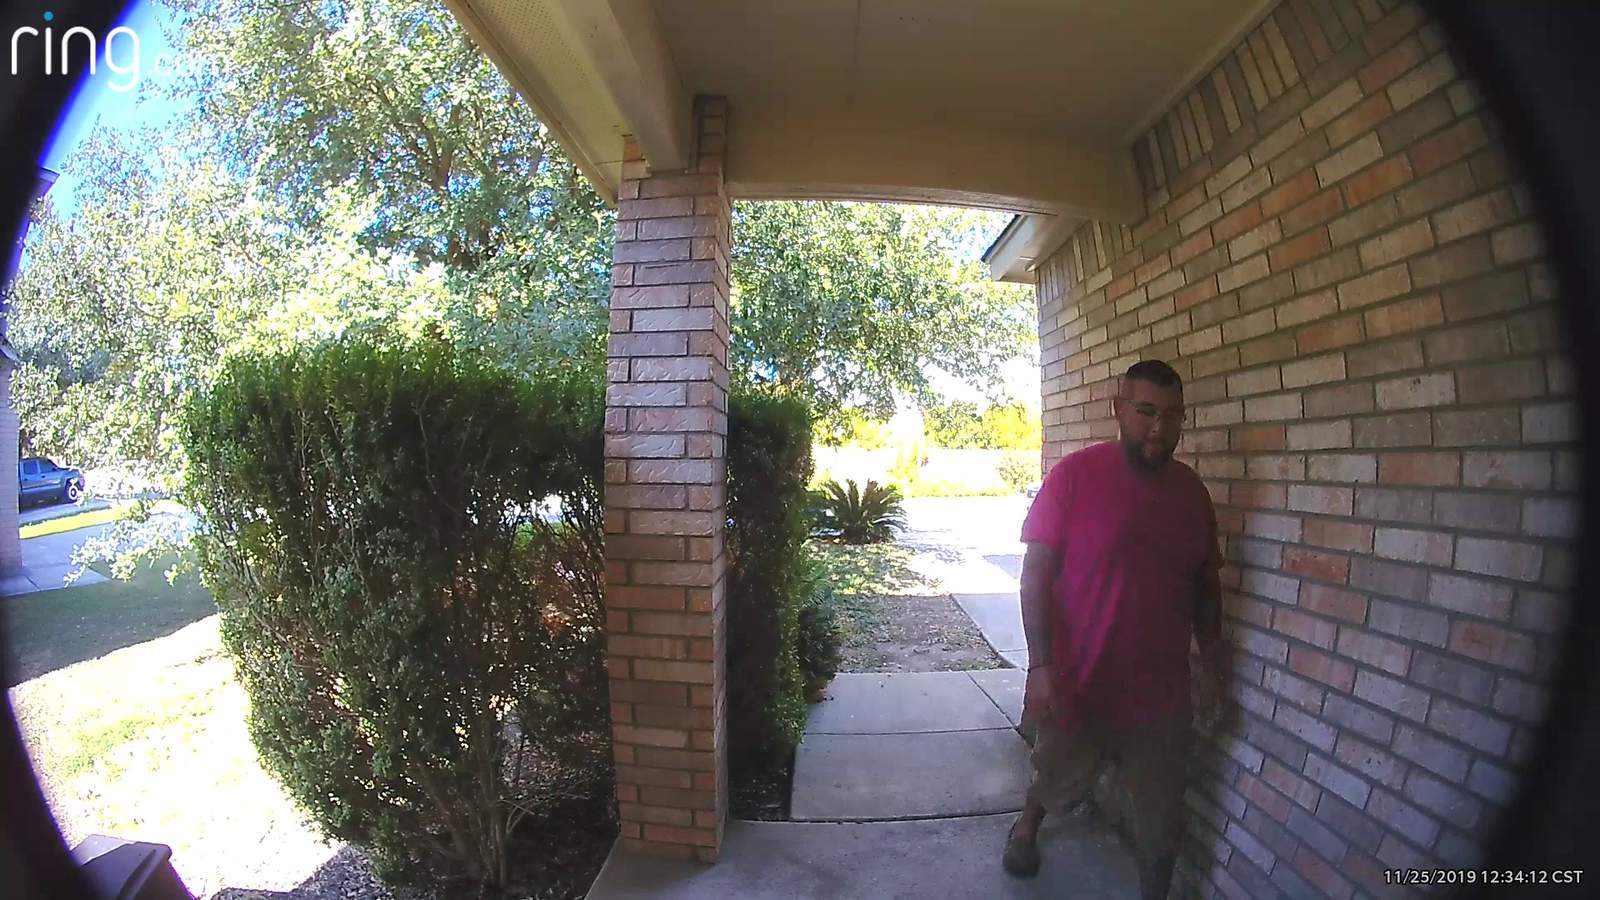 Porch pirate caught on video stealing Amazon package minutes after truck dropped it off